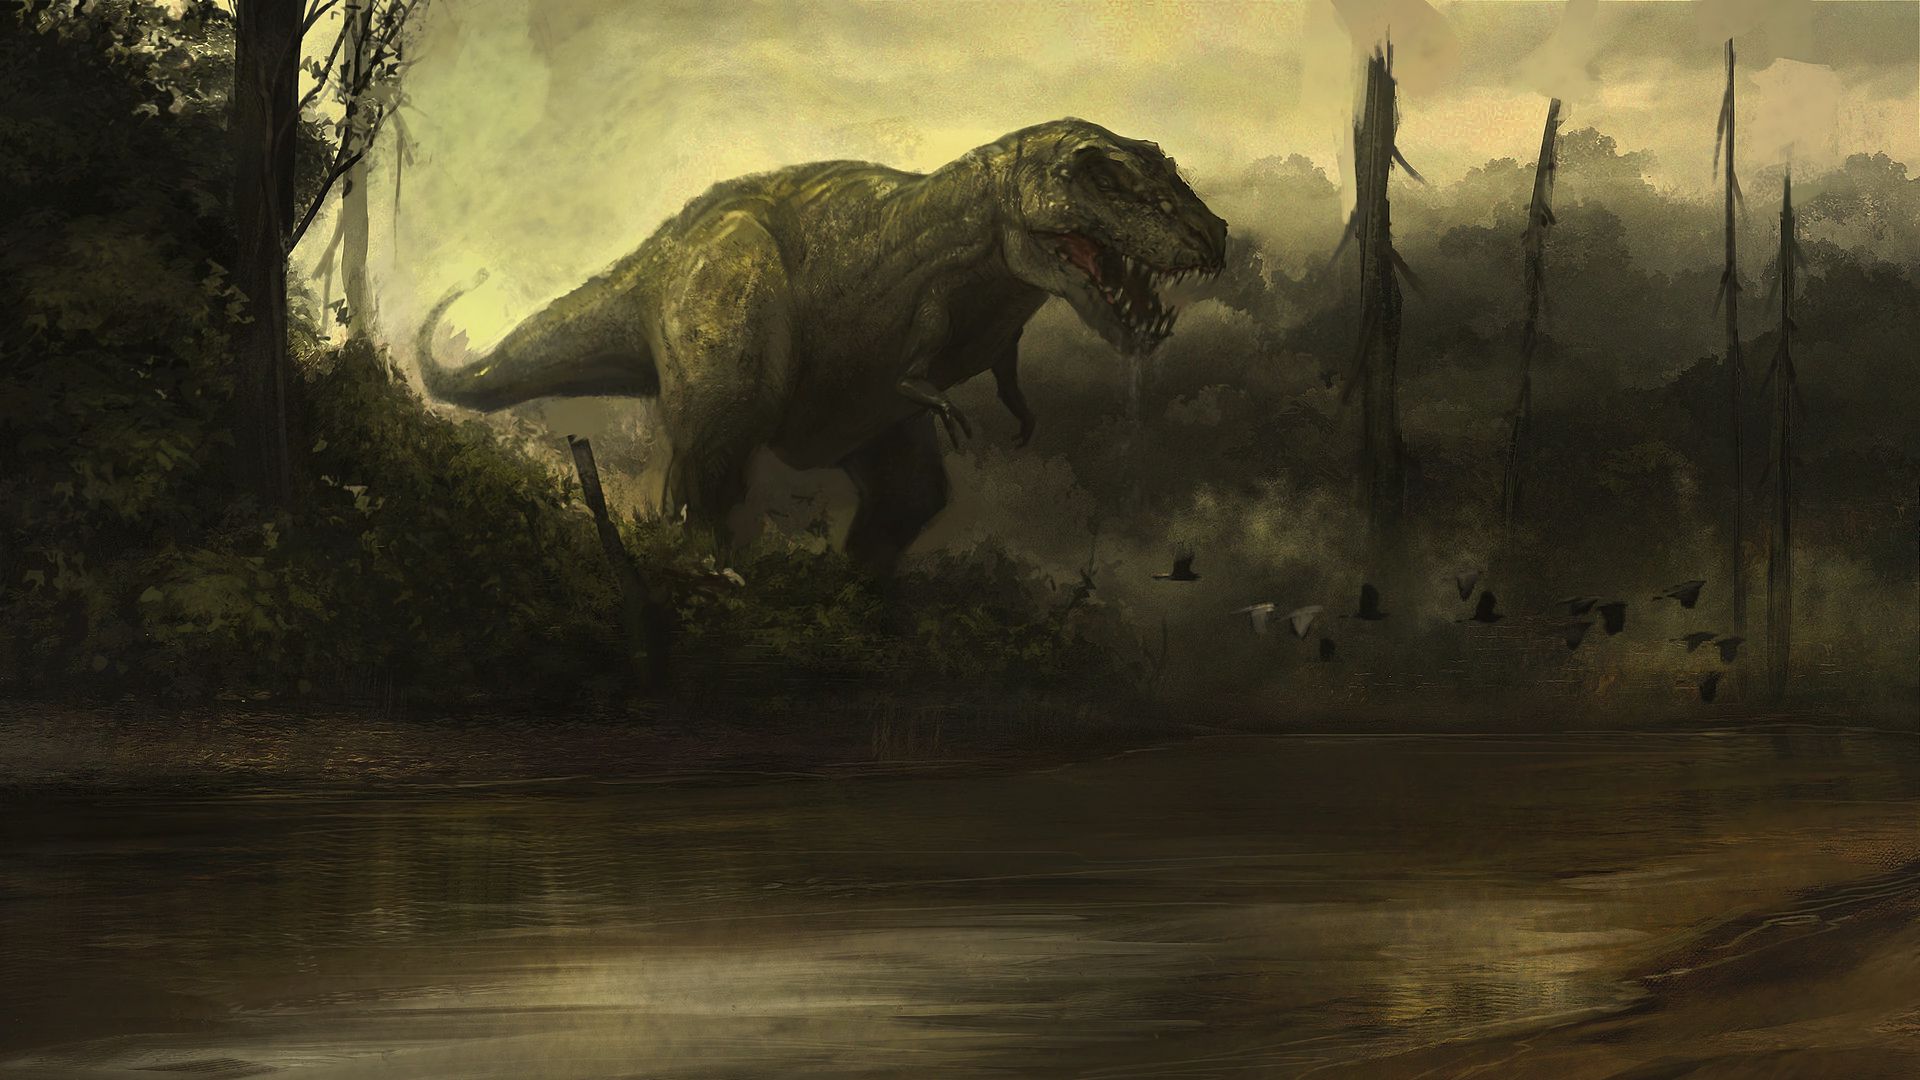 Download wallpaper 1920x1080 dinosaur, fangs, aggression full hd, hdtv,  fhd, 1080p hd background